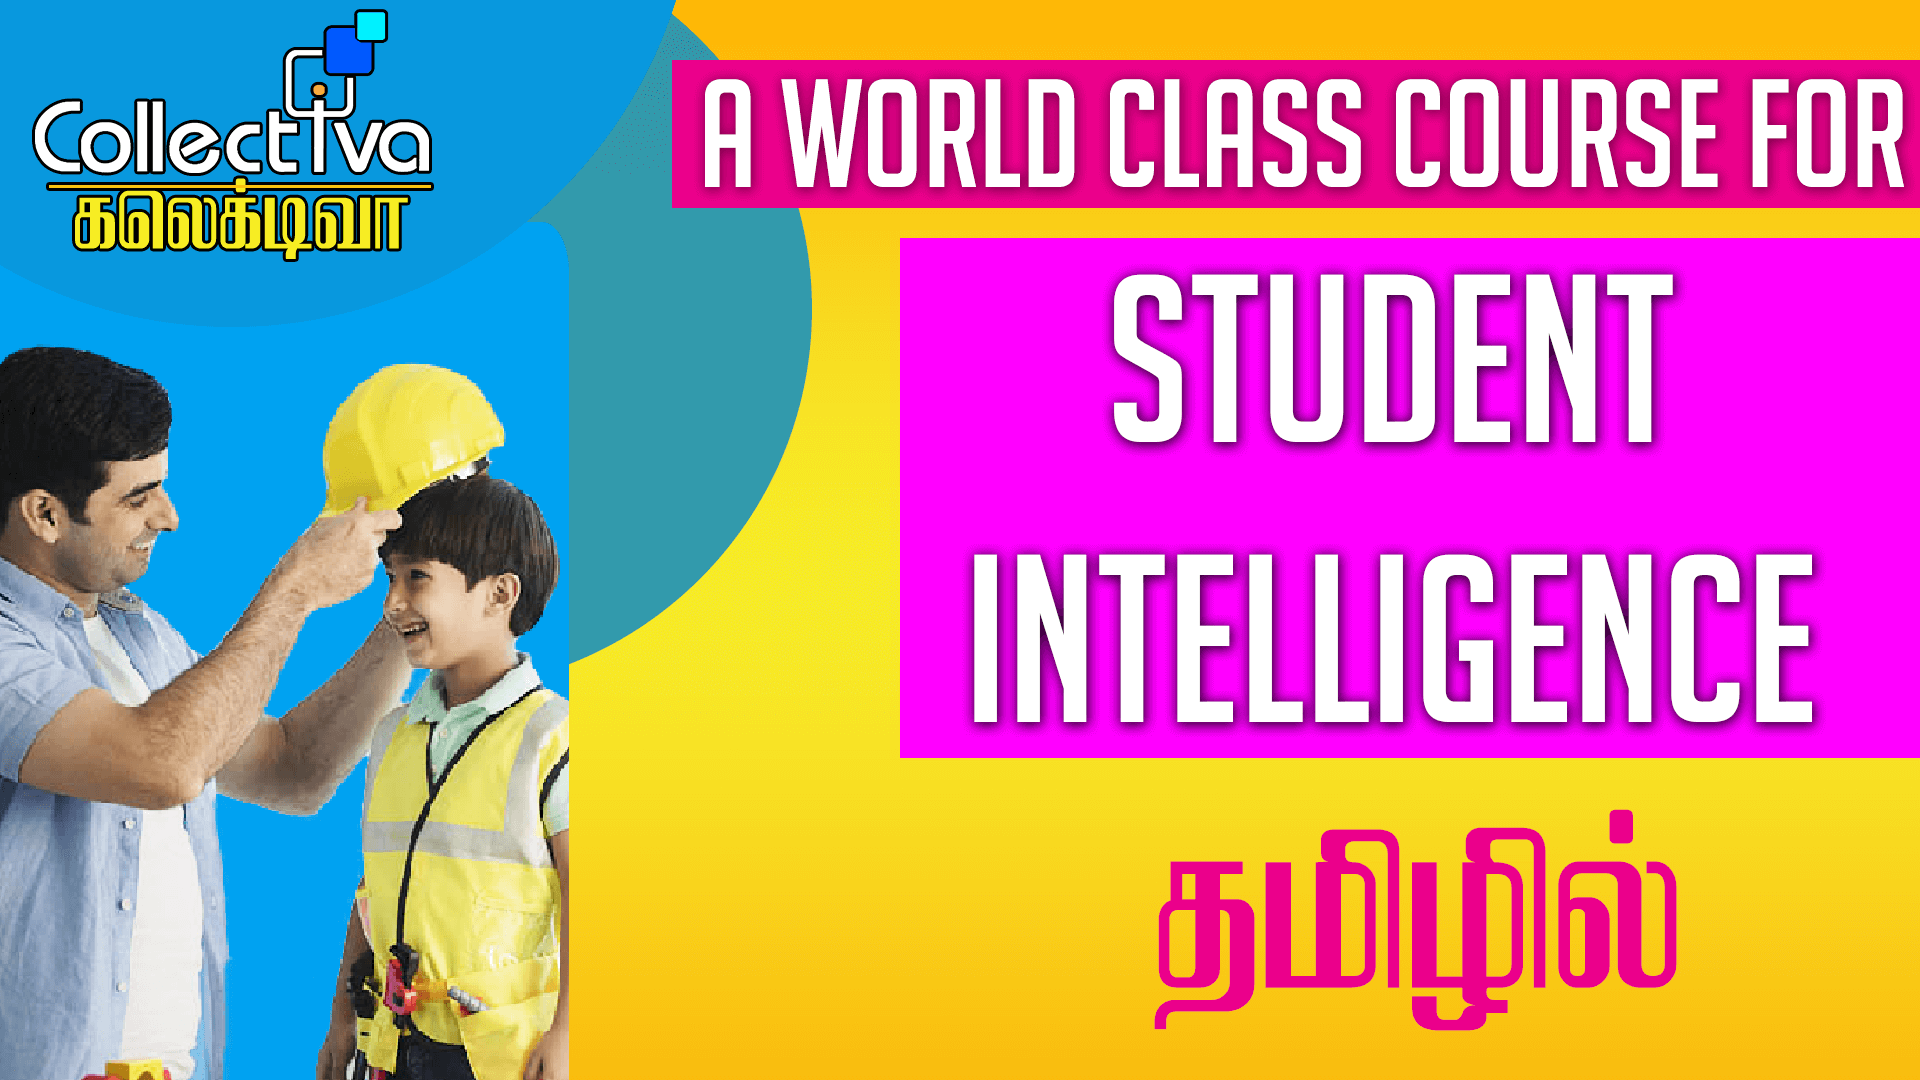 Student Intelligence Package